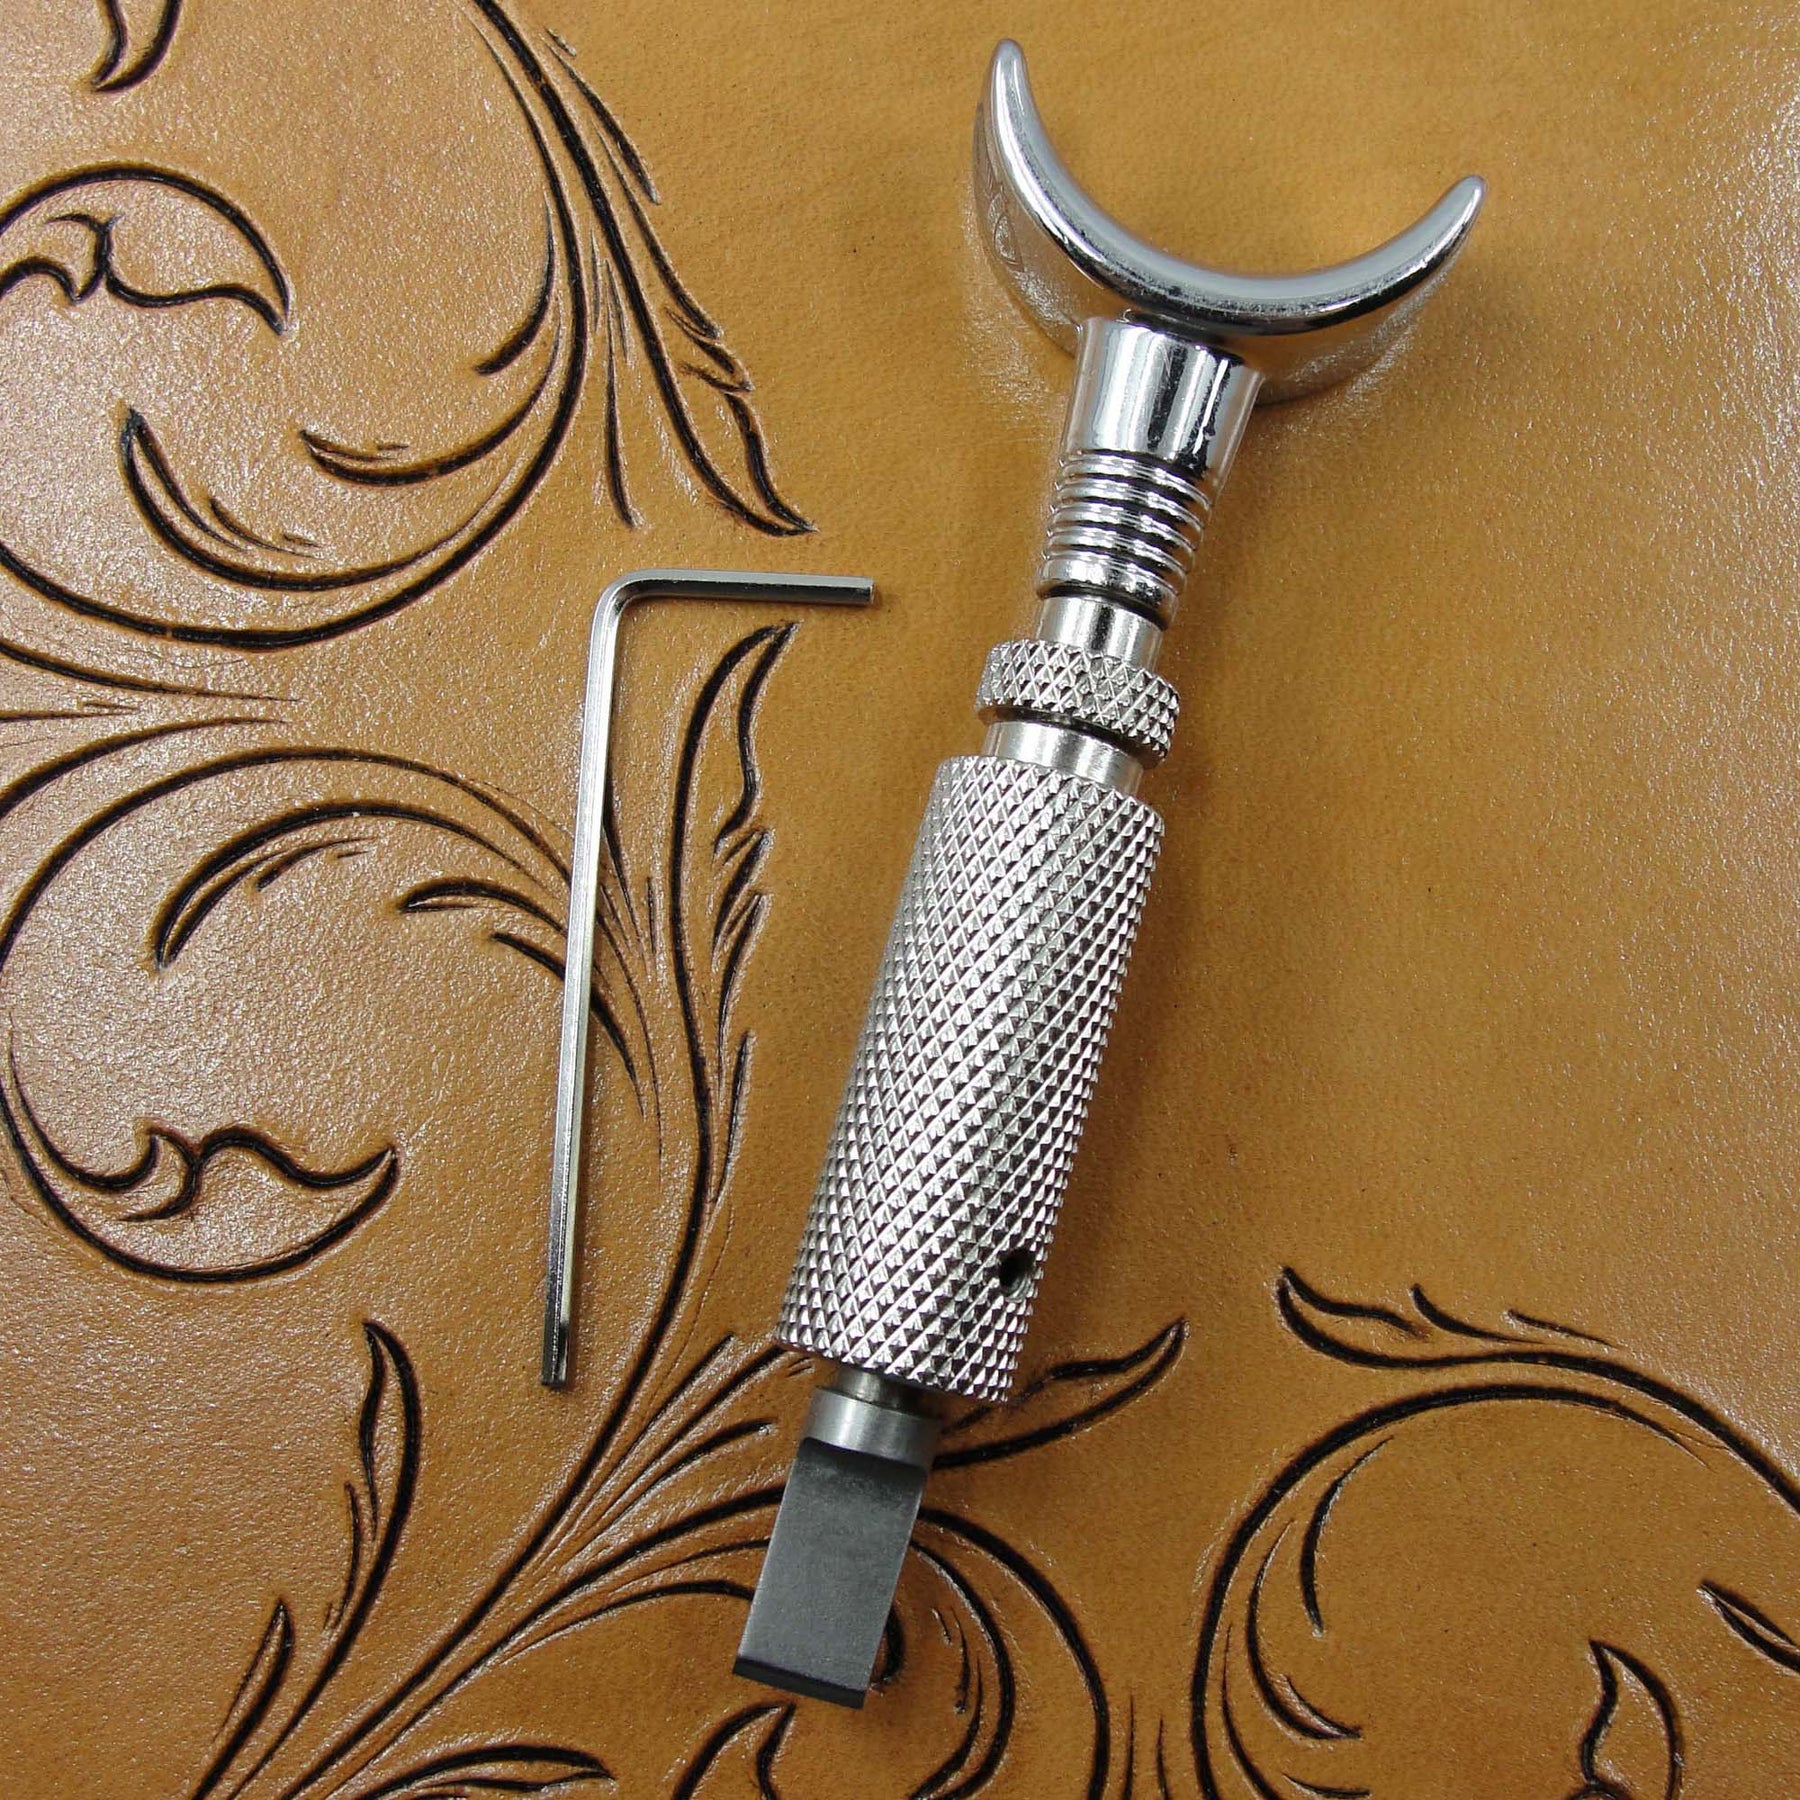 Tandy Leather Cutting Adjustable Swivel Knife